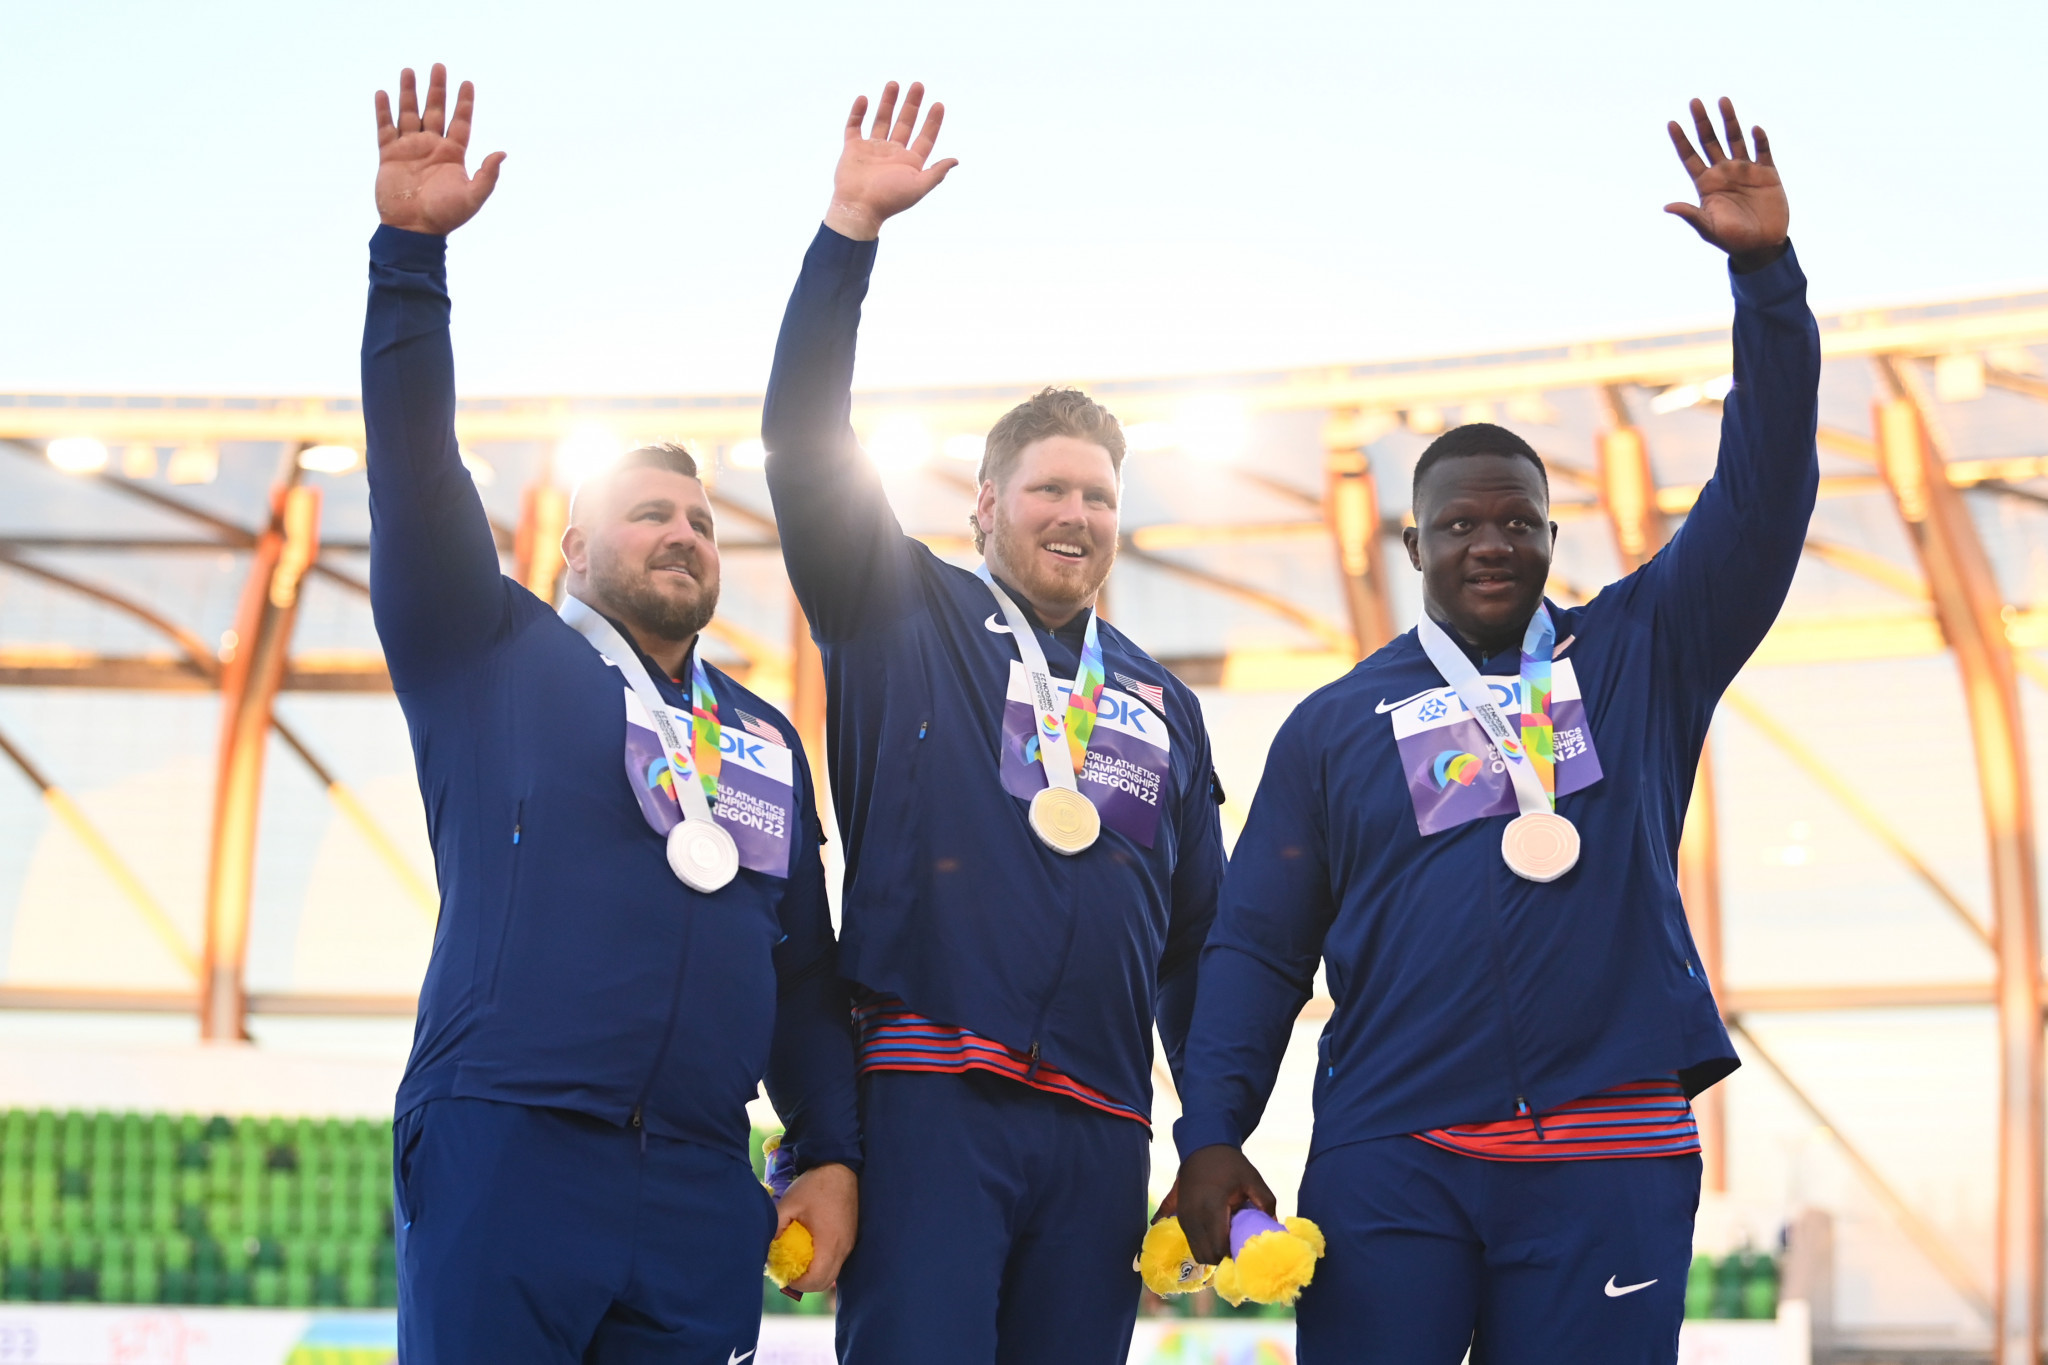 Crouse led an American podium sweep as 2019 champion Joe Kovacs, left, and Josh Awotunde came second and third, respectively ©Getty Images